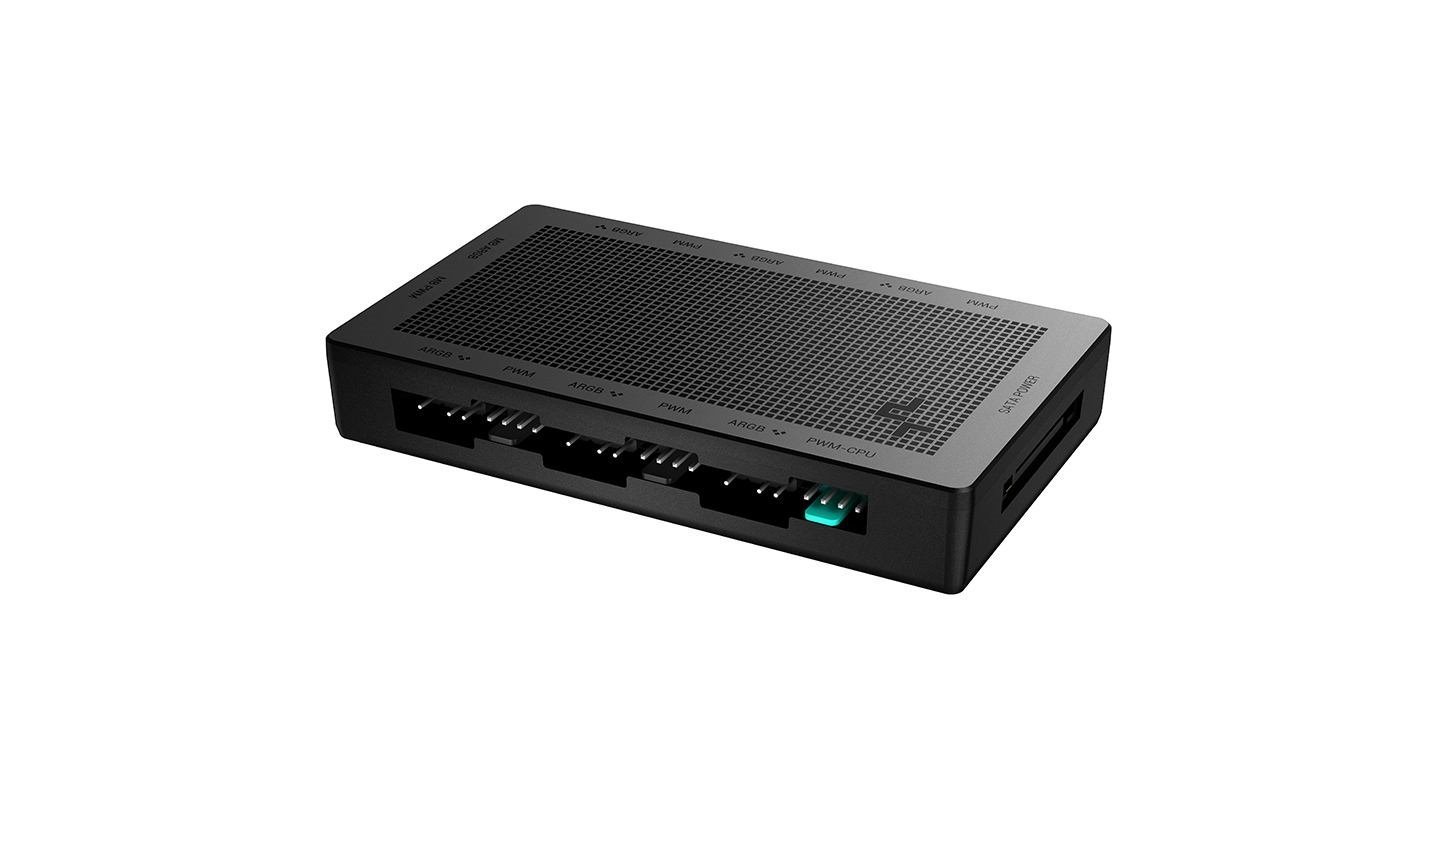 DeepCool SC790 Fan Controller (DeepCool SC790 2-In-1 Addressable RGB & PWM Fan Hub 6-Port Connect Up To 6 PWM Argb 3-Pin Fans Simultaneously While Occupying Minimal Motherboard Headers Magnetic For